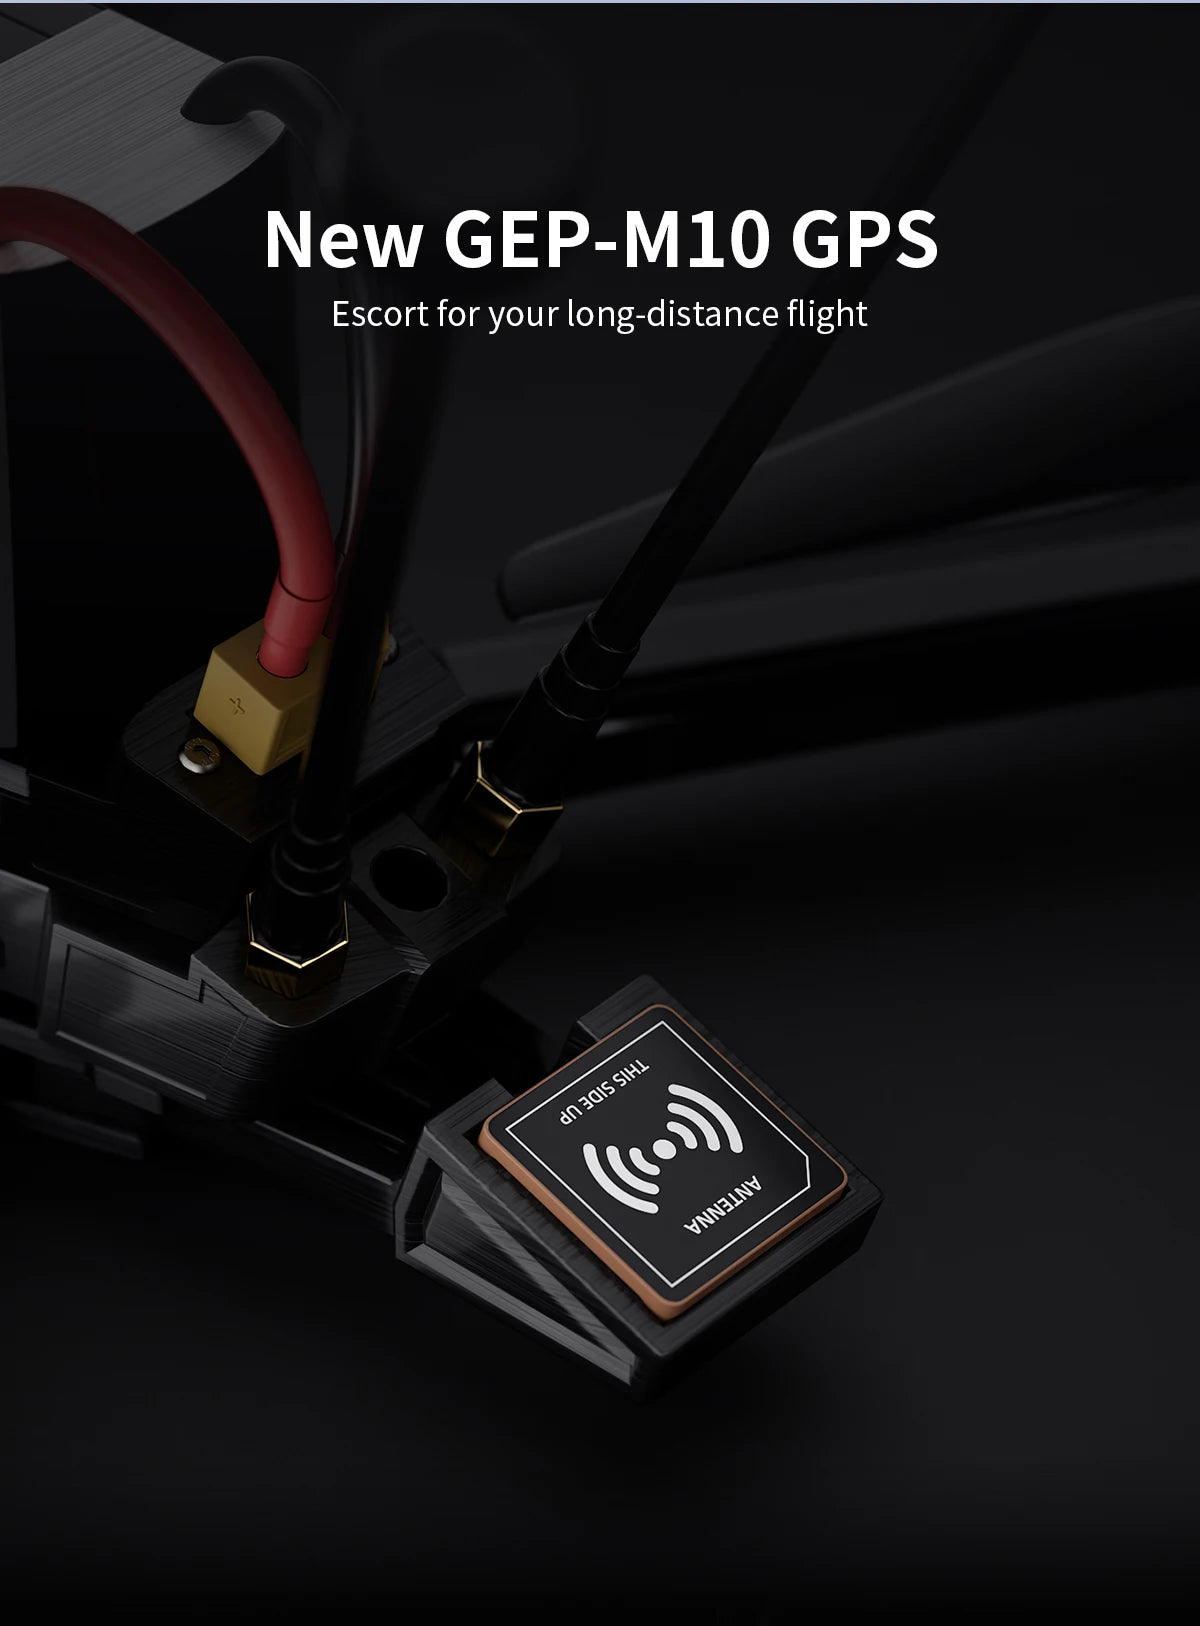 GEPRC MOZ7 HD O3, GEP-M1O GPS Escort for your long-distance flight 8